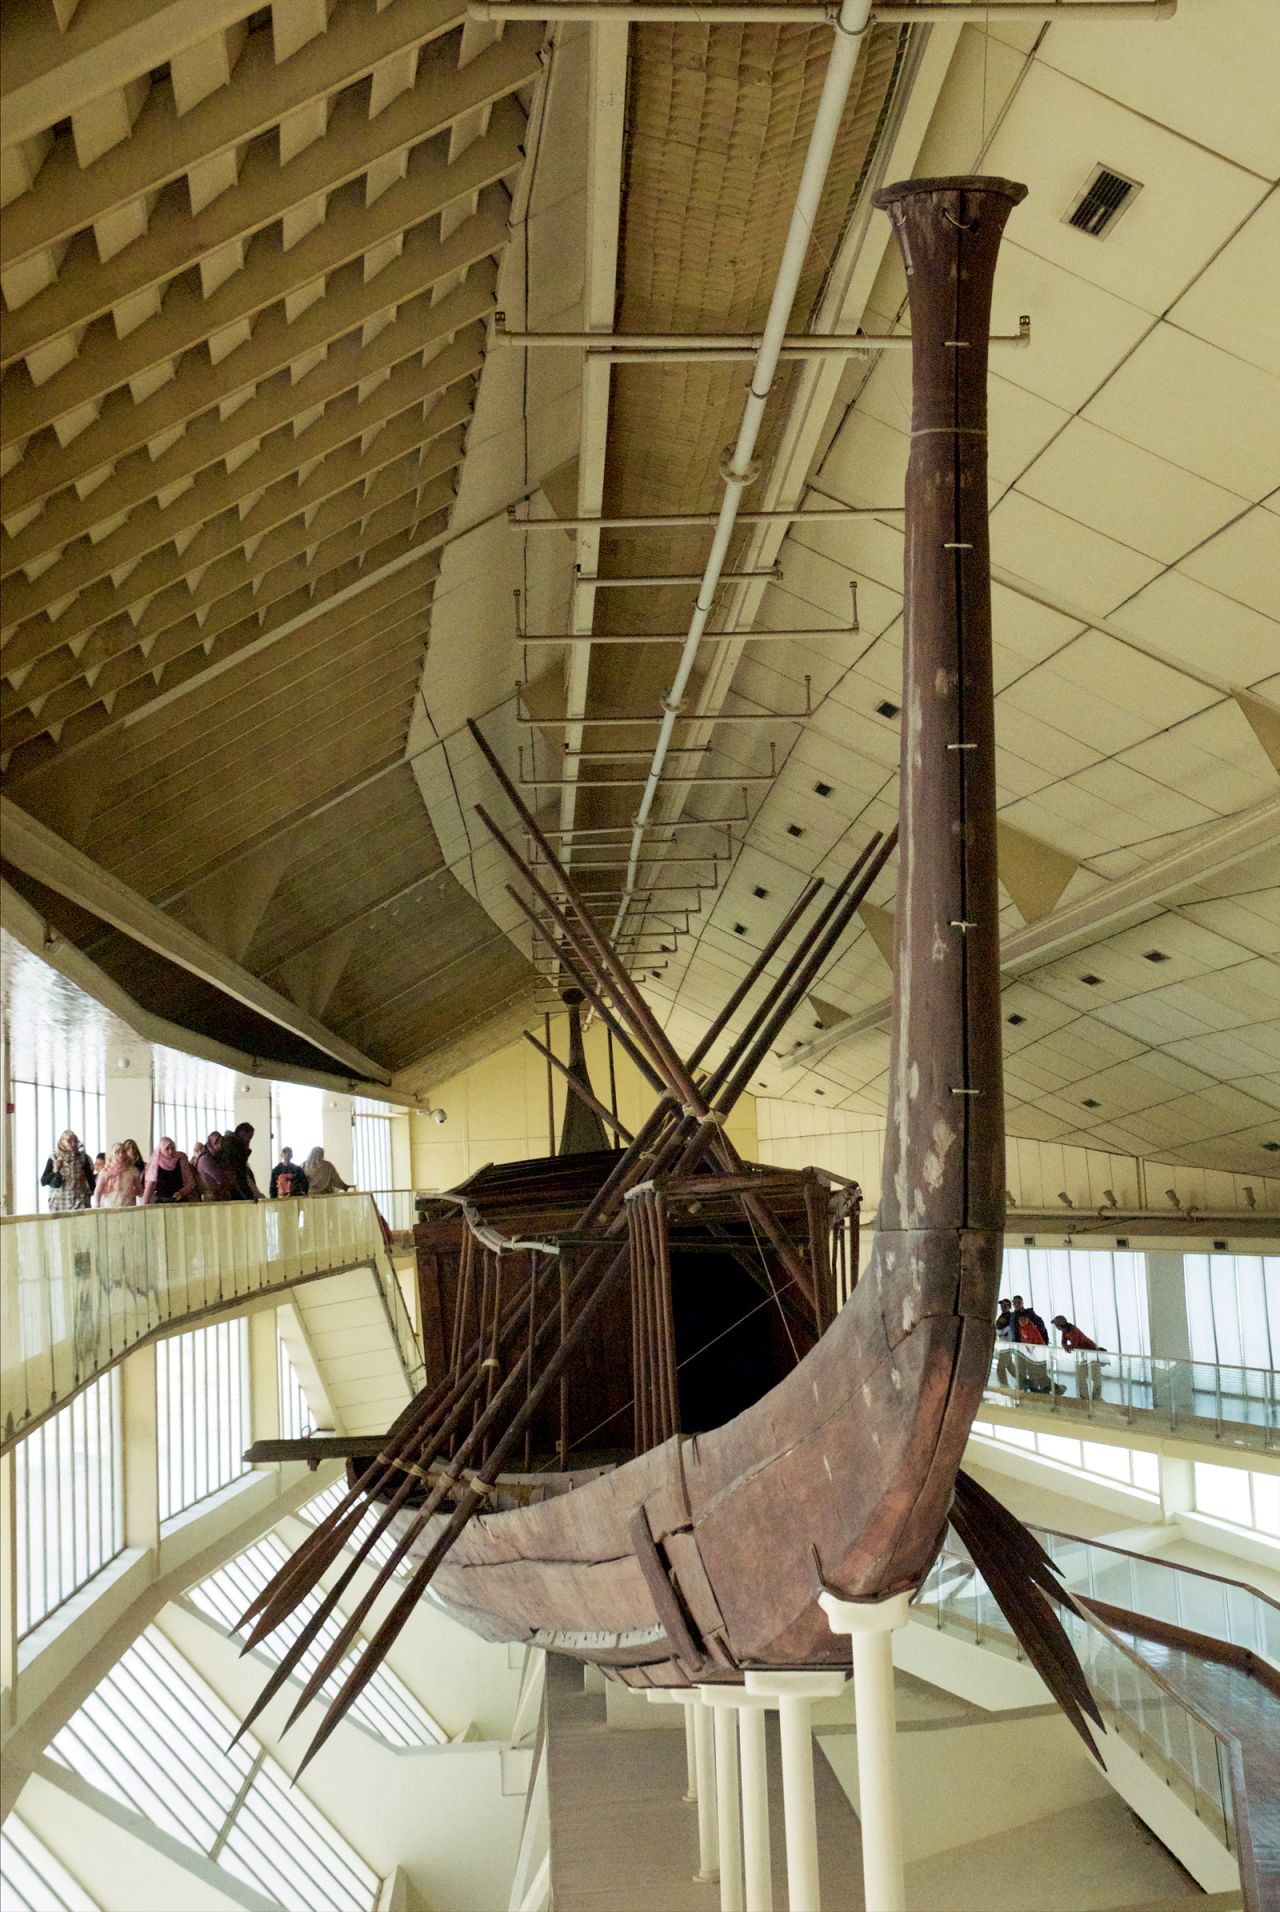 Khufu's boat was reconstructed from over 1,000 pieces and has been on public display since 1982. Lehner and Hawass differ in theories as to why pharaohs buried boats. Hawass believes Khufu's vessel was a "solar boat," used after death to transport Khufu on his daily trips across the sky, like the sun god Ra. Lehner meanwhile believes the boat was involved in Khufu's funeral and, as it was disassembled, was not intended for use in the afterlife.